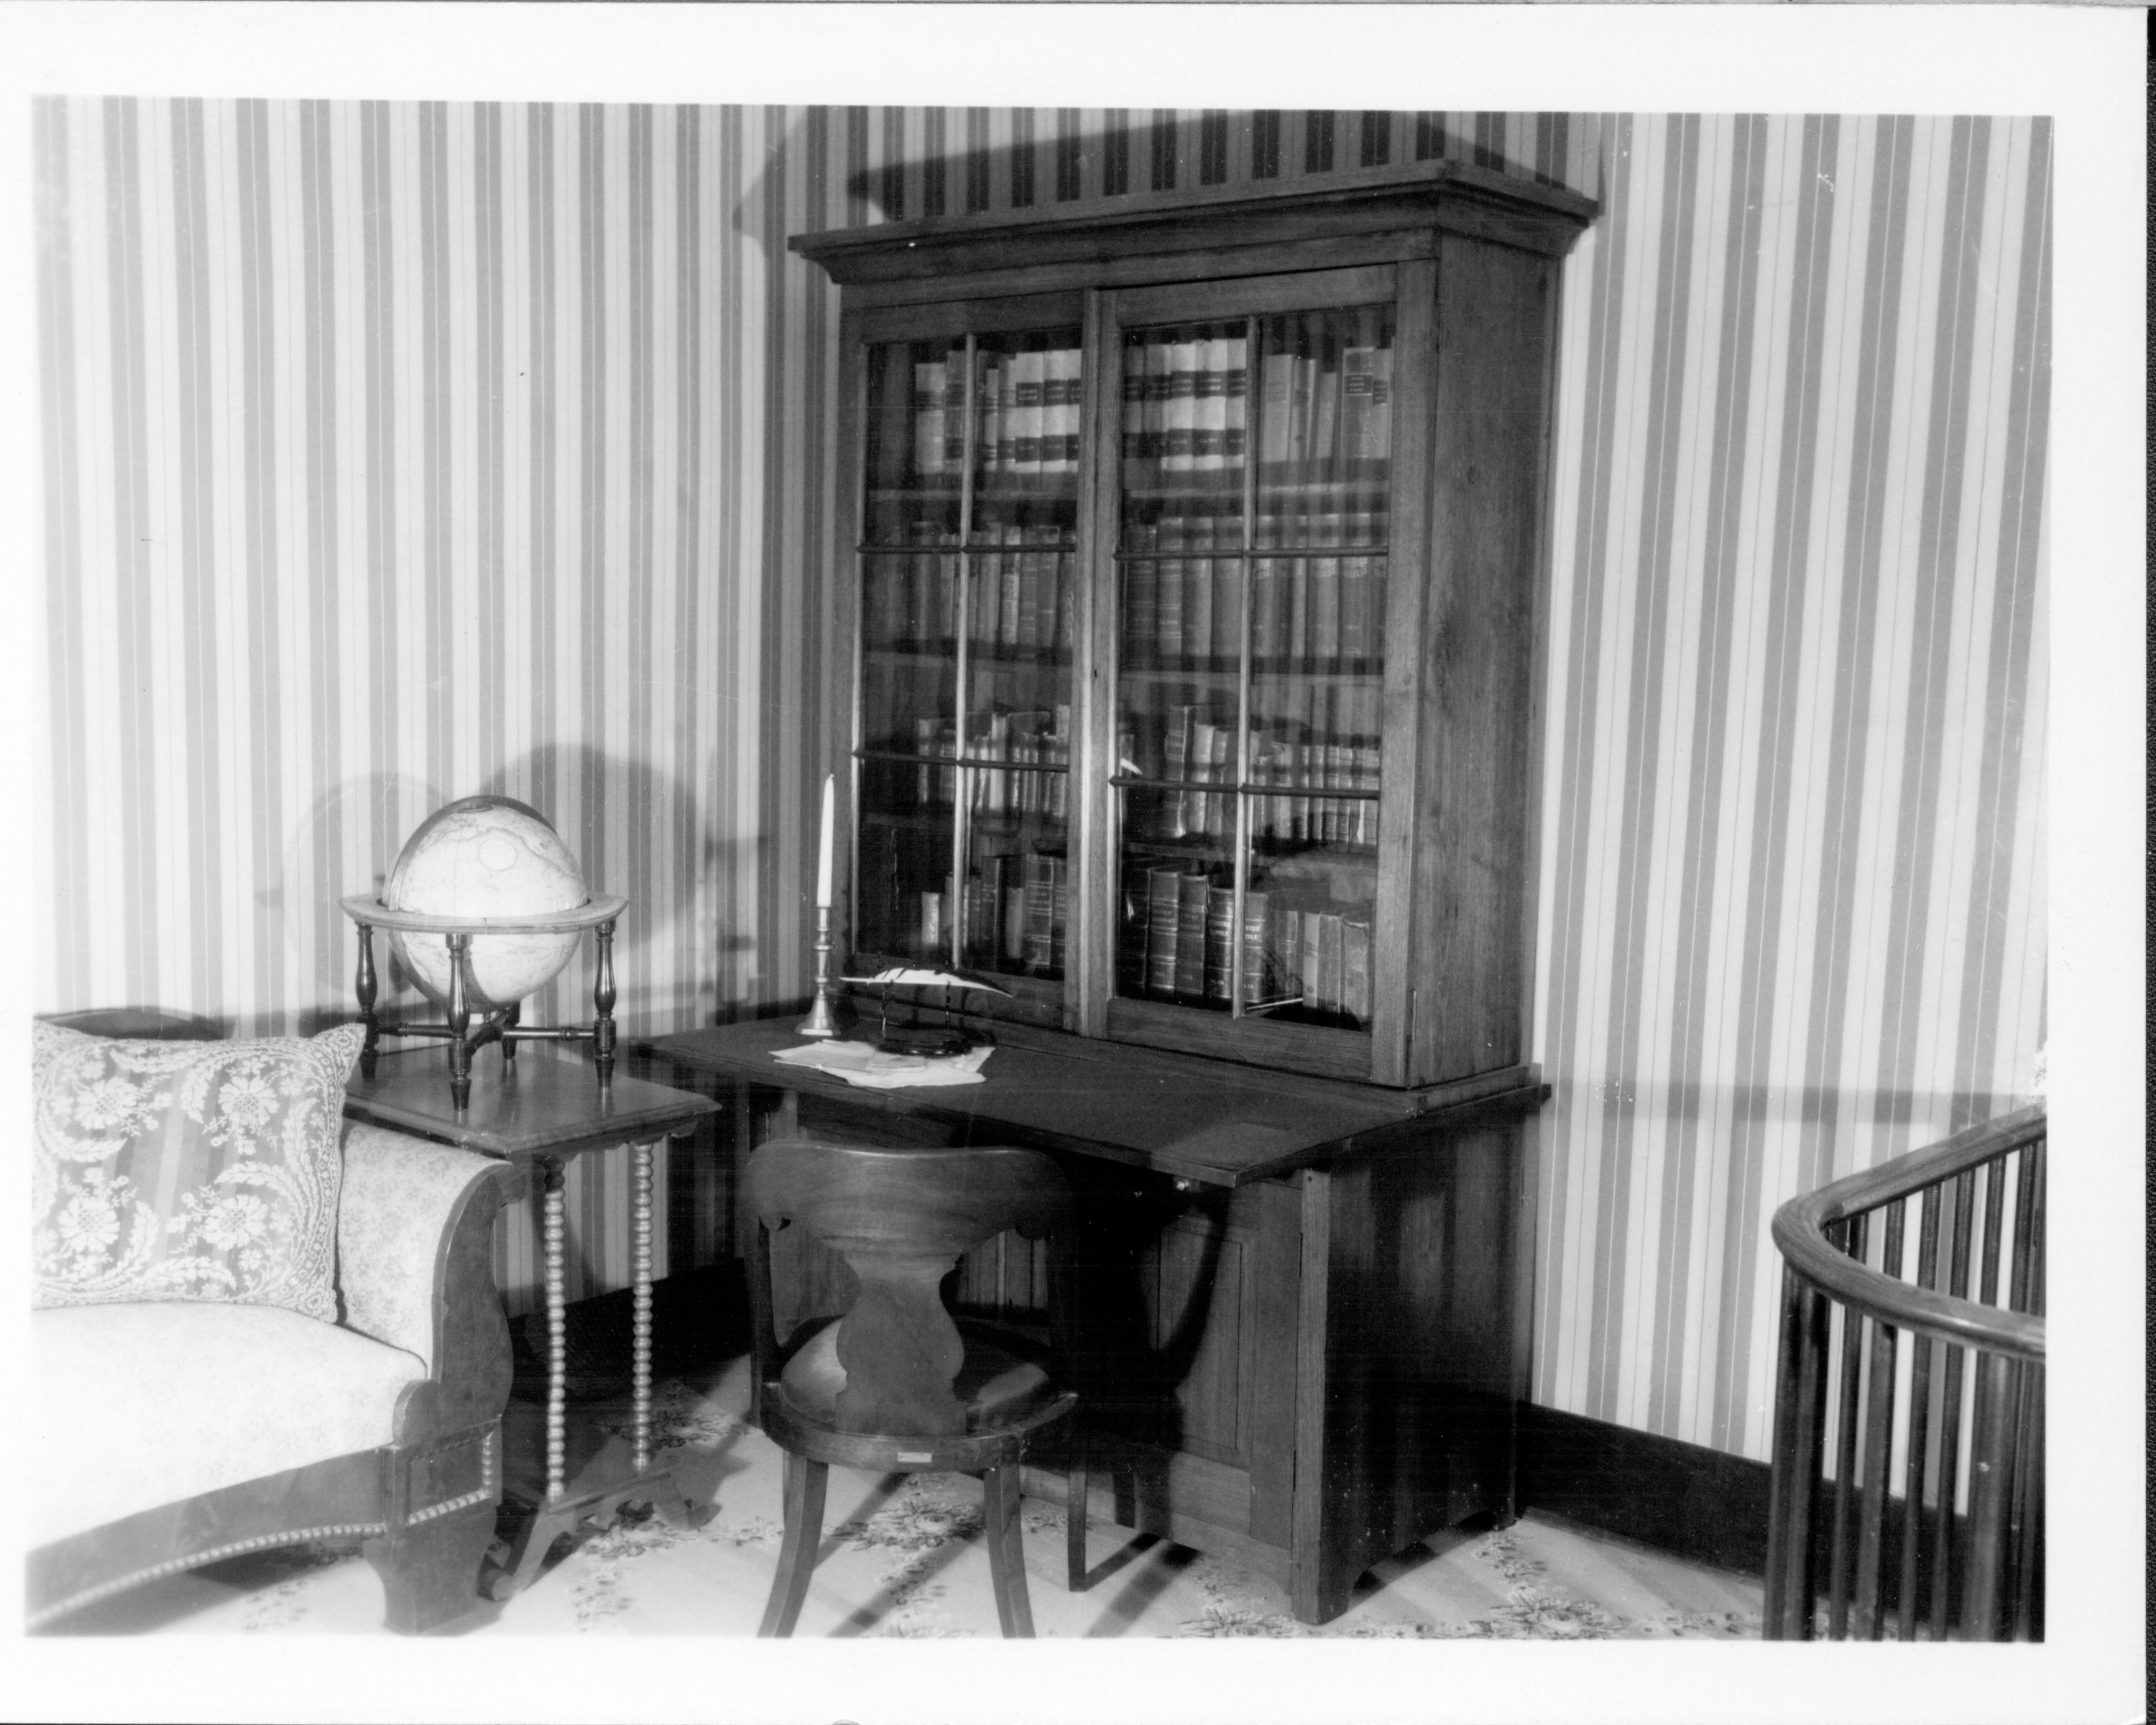 Rear Parlor - Lincoln Home neg.#63, class.#310 Lincoln, Home, Sitting, Room, Parlor